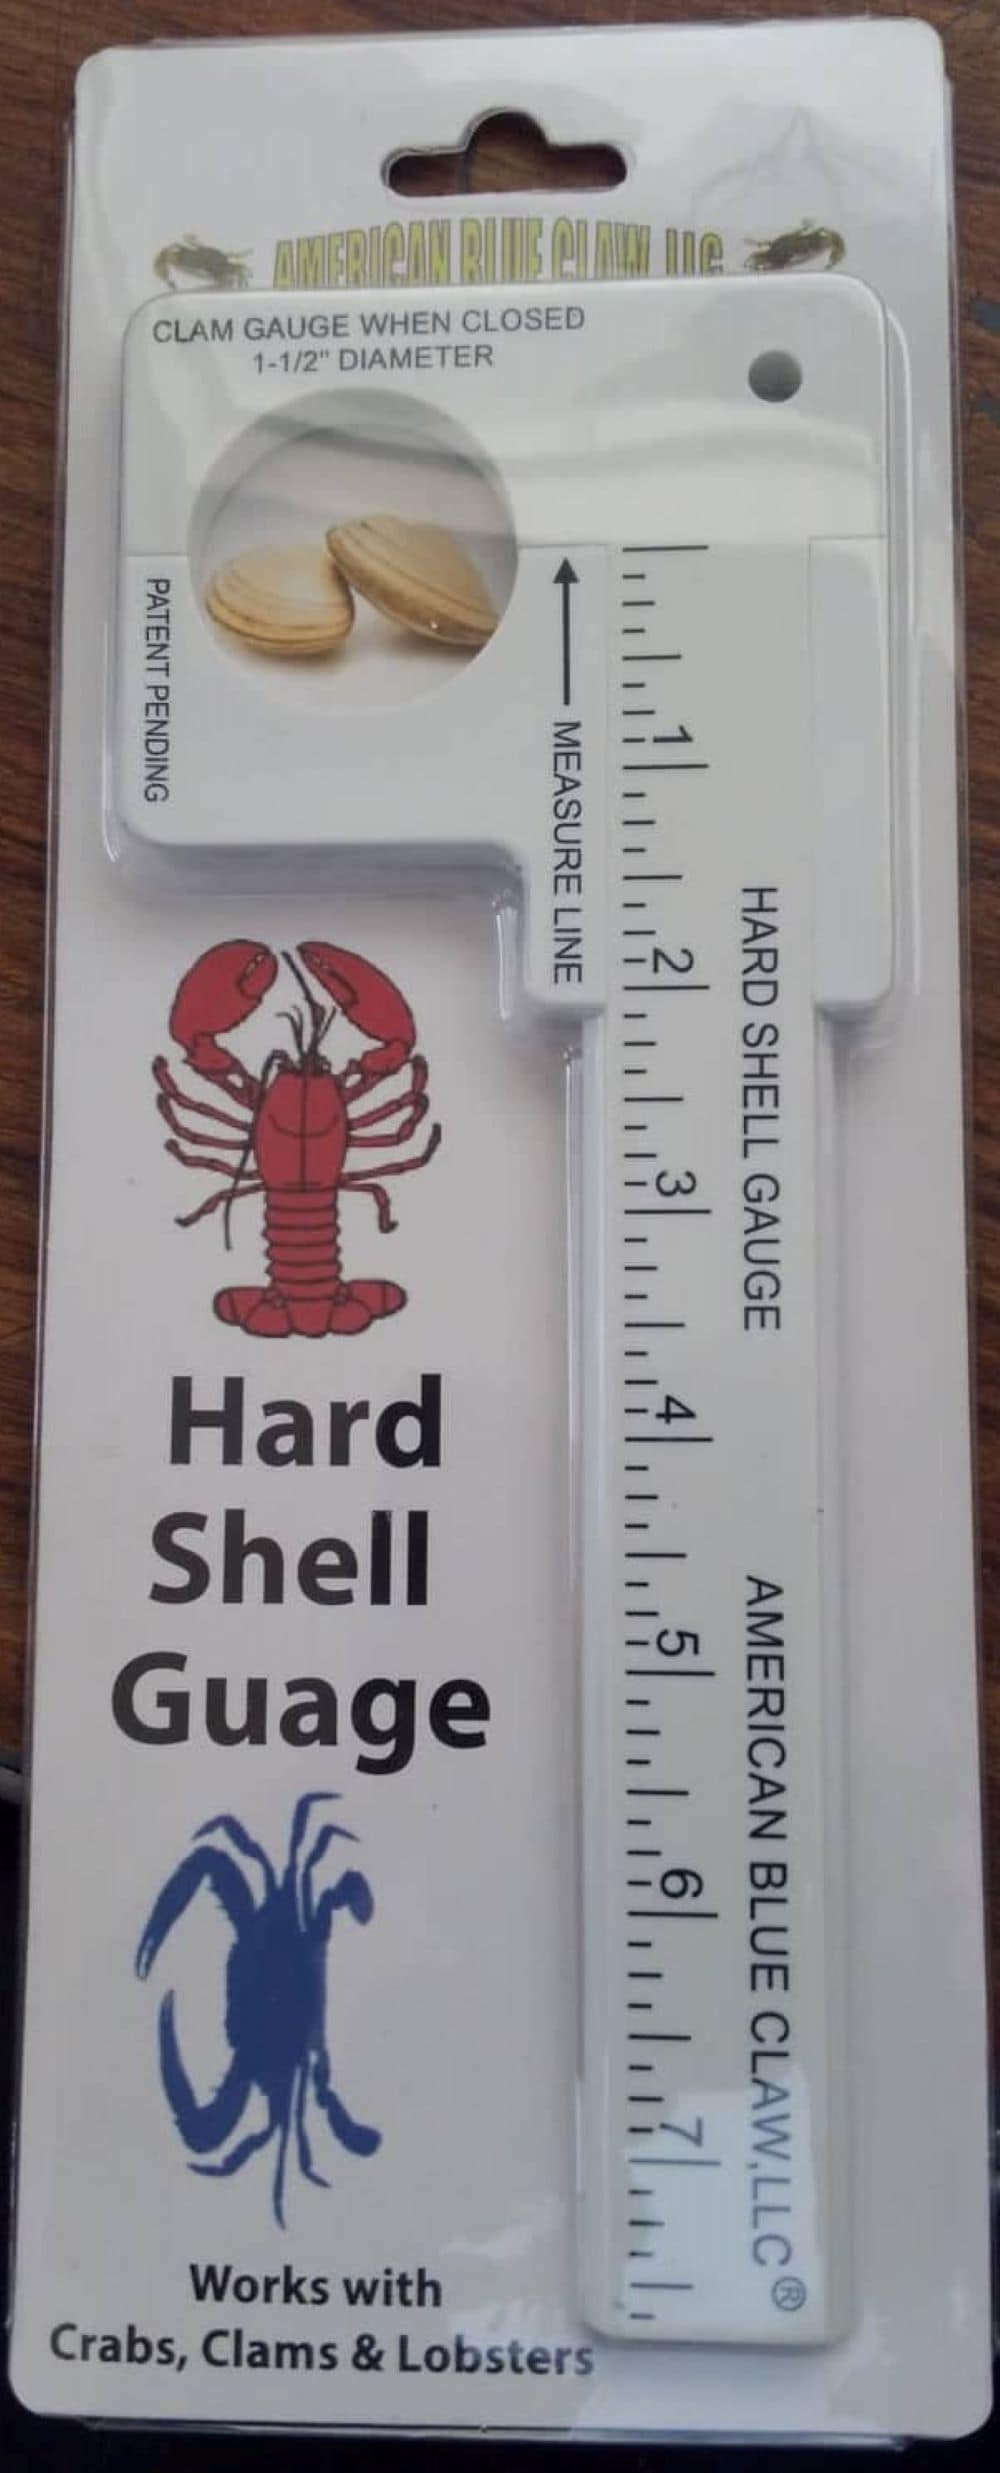 American Blue Claw Black Crabbing Equipment: Crab Tong with Gauge for Easy Catch and Measurement | S2D-BLK-PKG